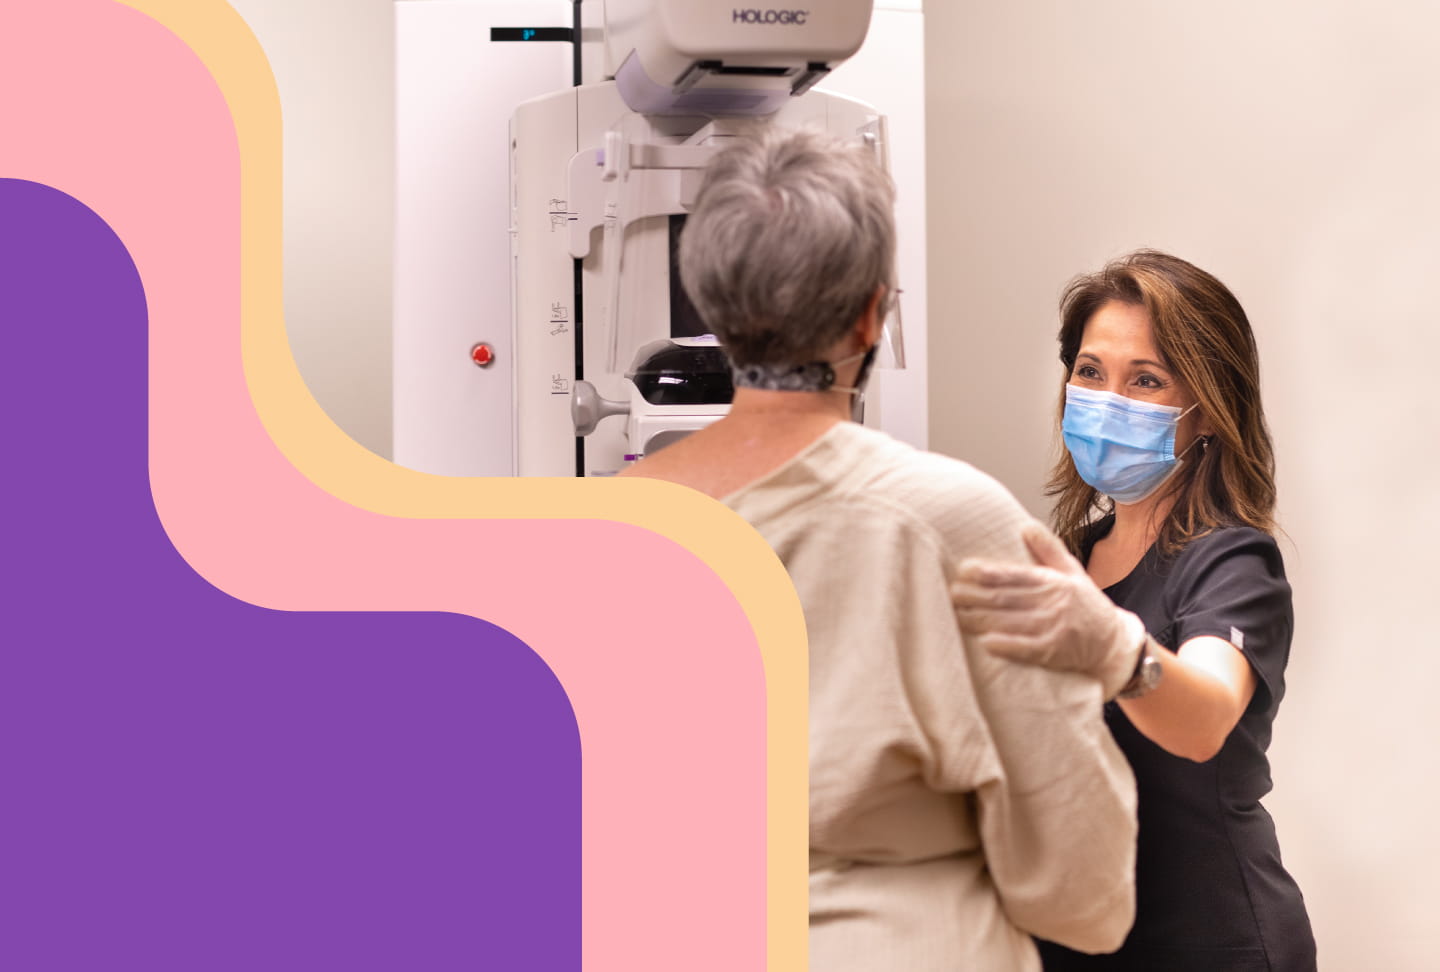 Wellstar Recently Partnered with the American Cancer Society to Provide Free Mammograms to Women in Need Image